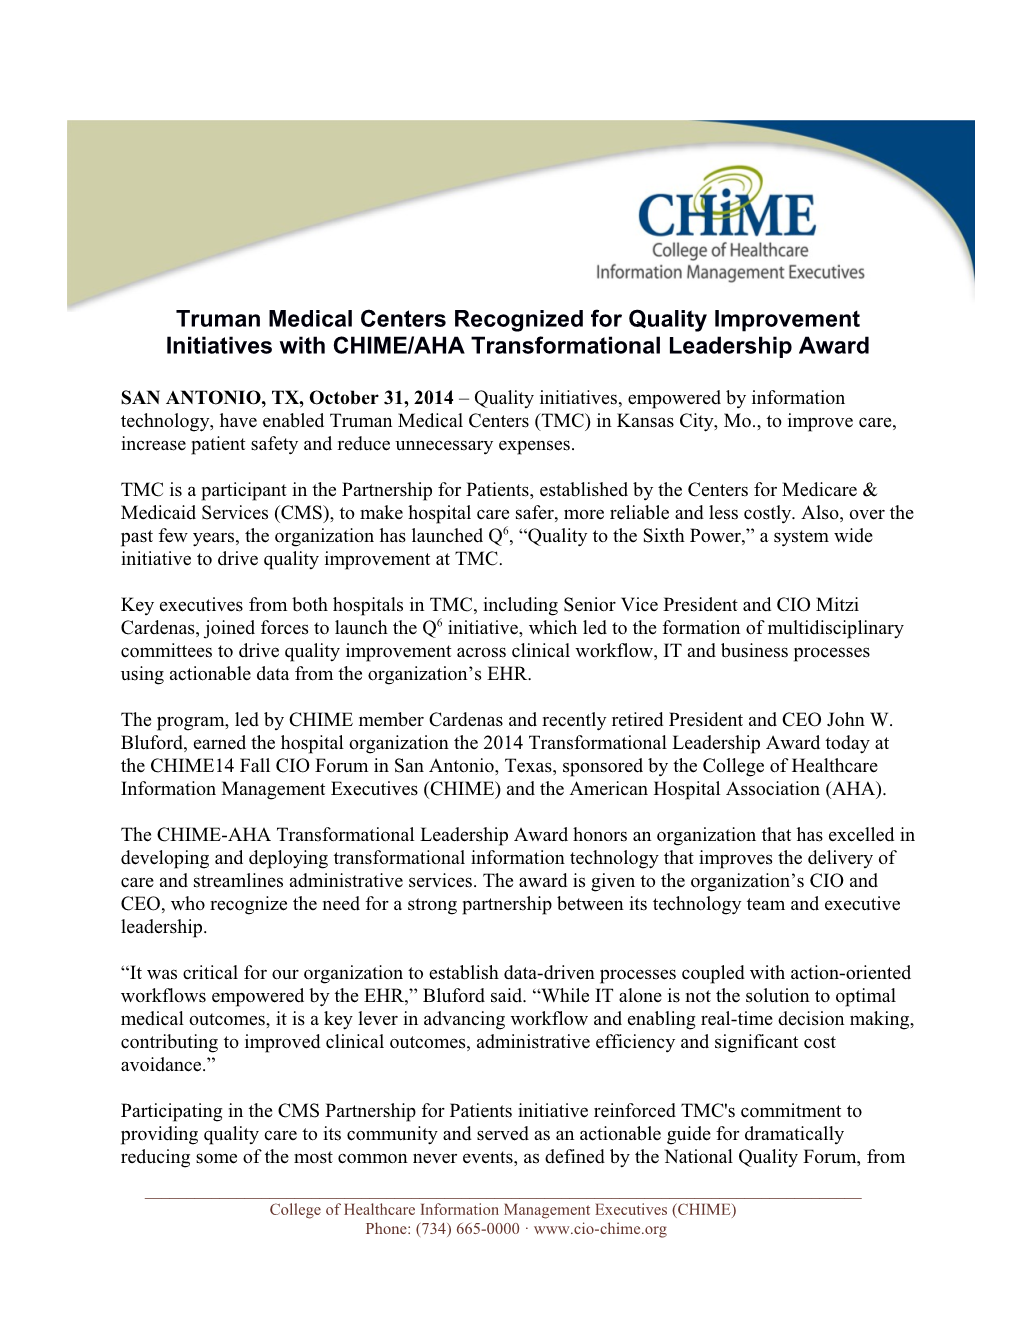 Truman Medical Centersrecognized for Quality Improvement Initiatives with CHIME/AHA